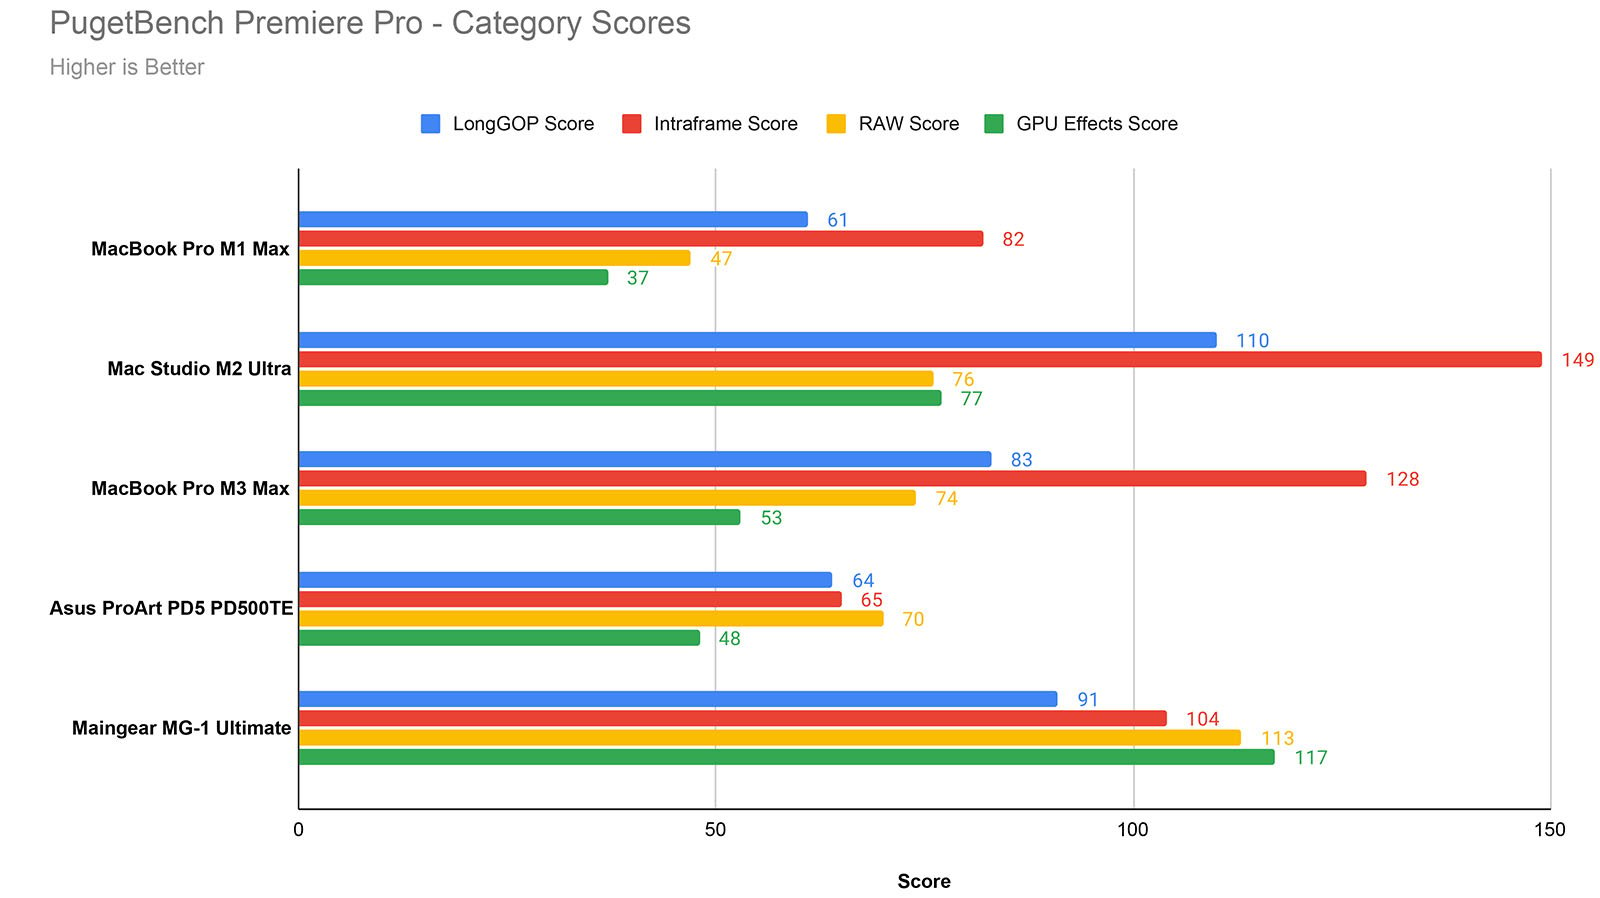 Bar graph comparing PugetBench Premiere Pro category scores across five devices: MacBook Pro M1 Max, Mac Studio M2 Ultra, MacBook Pro M3 Max, Asus ProArt PD5 PD500TE, and Maingear MG-1 Ultimate. Scores are given for LongGOP, Intraframe, RAW, and GPU Effects. High scores are better.